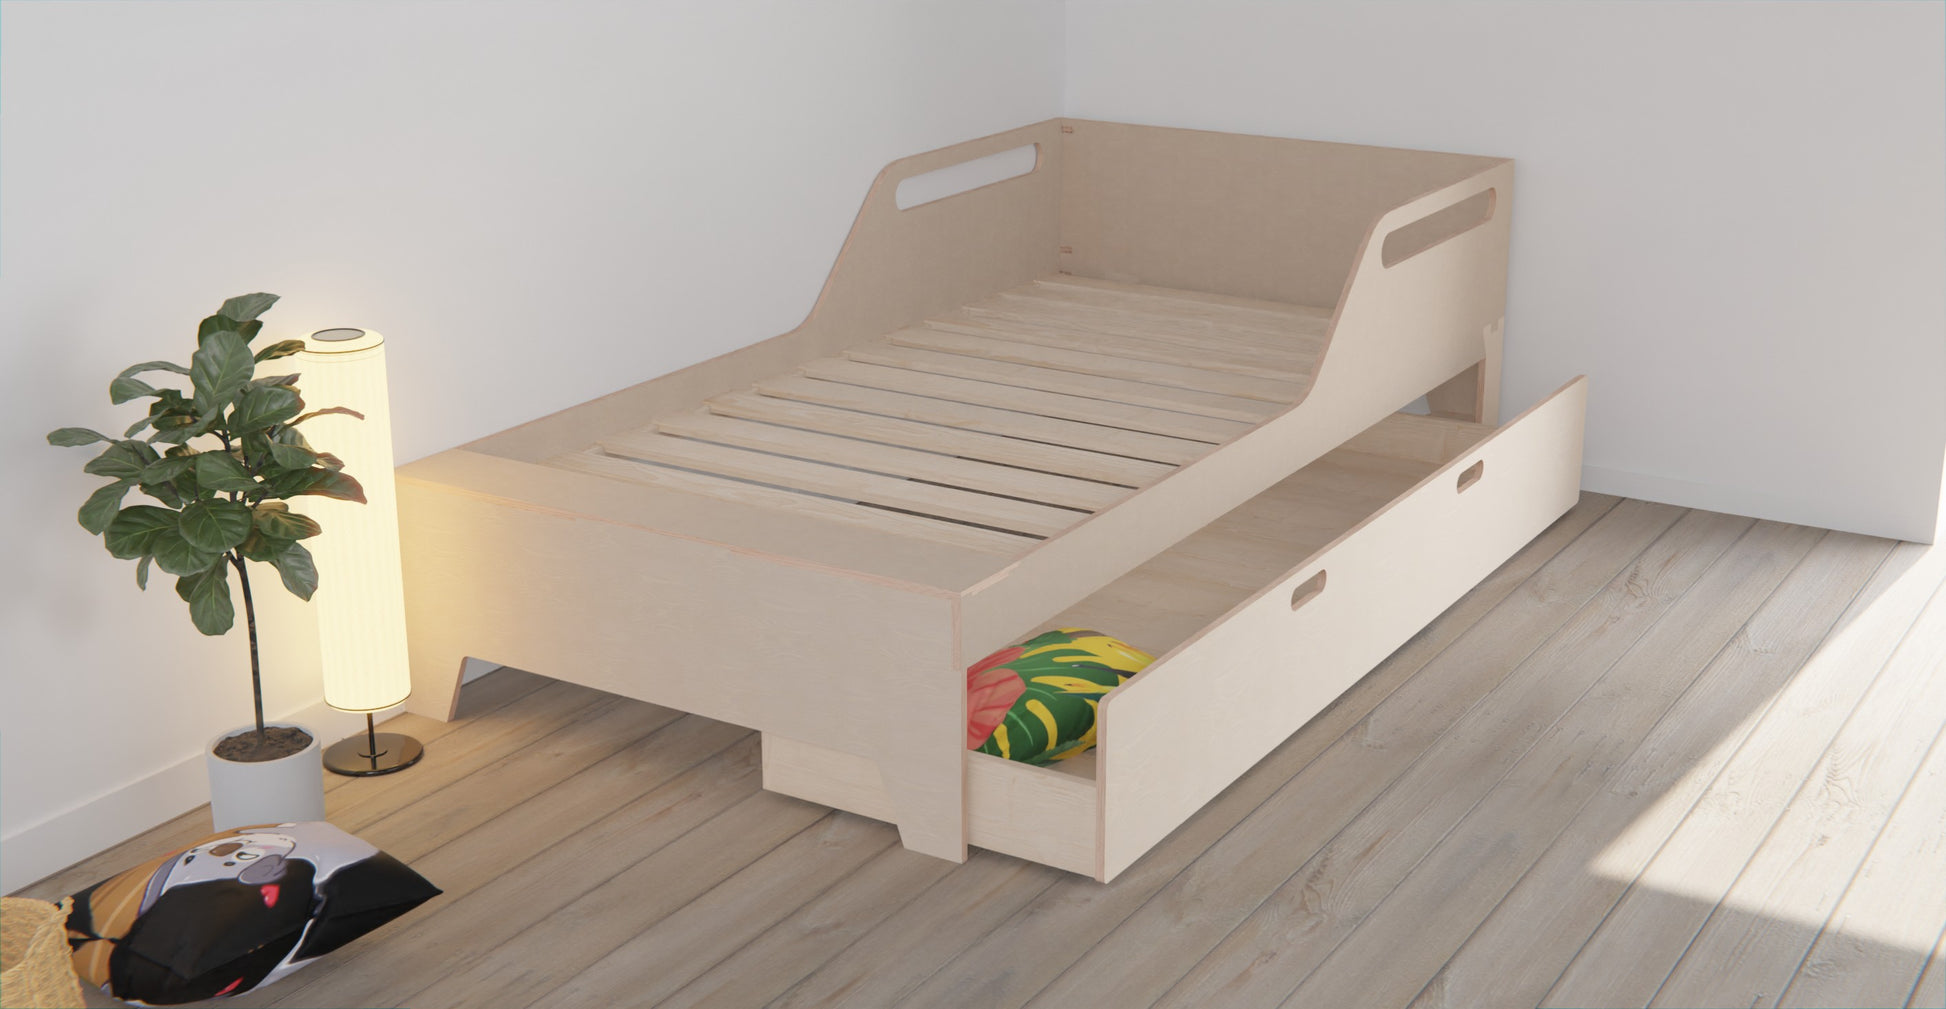 Create a safe and organised sleeping environment with our space-saving bed frame. Designed for kids, it features a storage and various guardrail options.